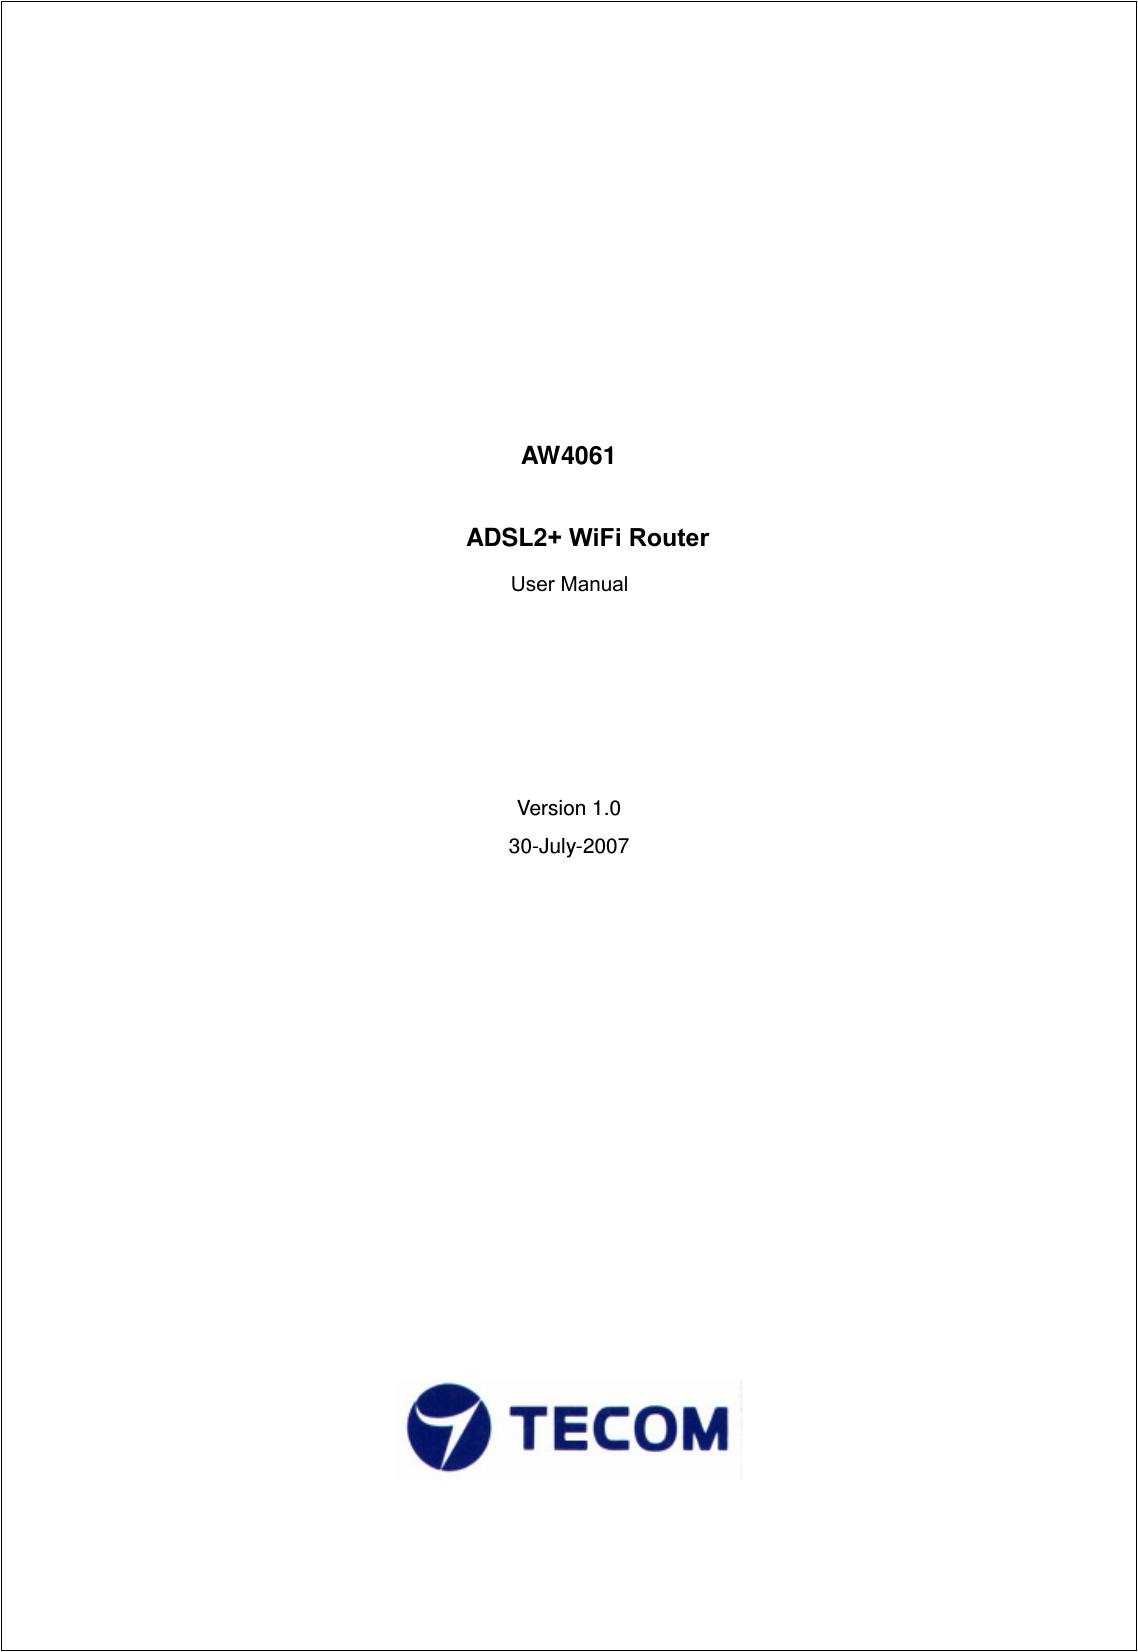          AW4061                                  ADSL2+ WiFi Router                                                                                                           User Manual     Version 1.0 30-July-2007                